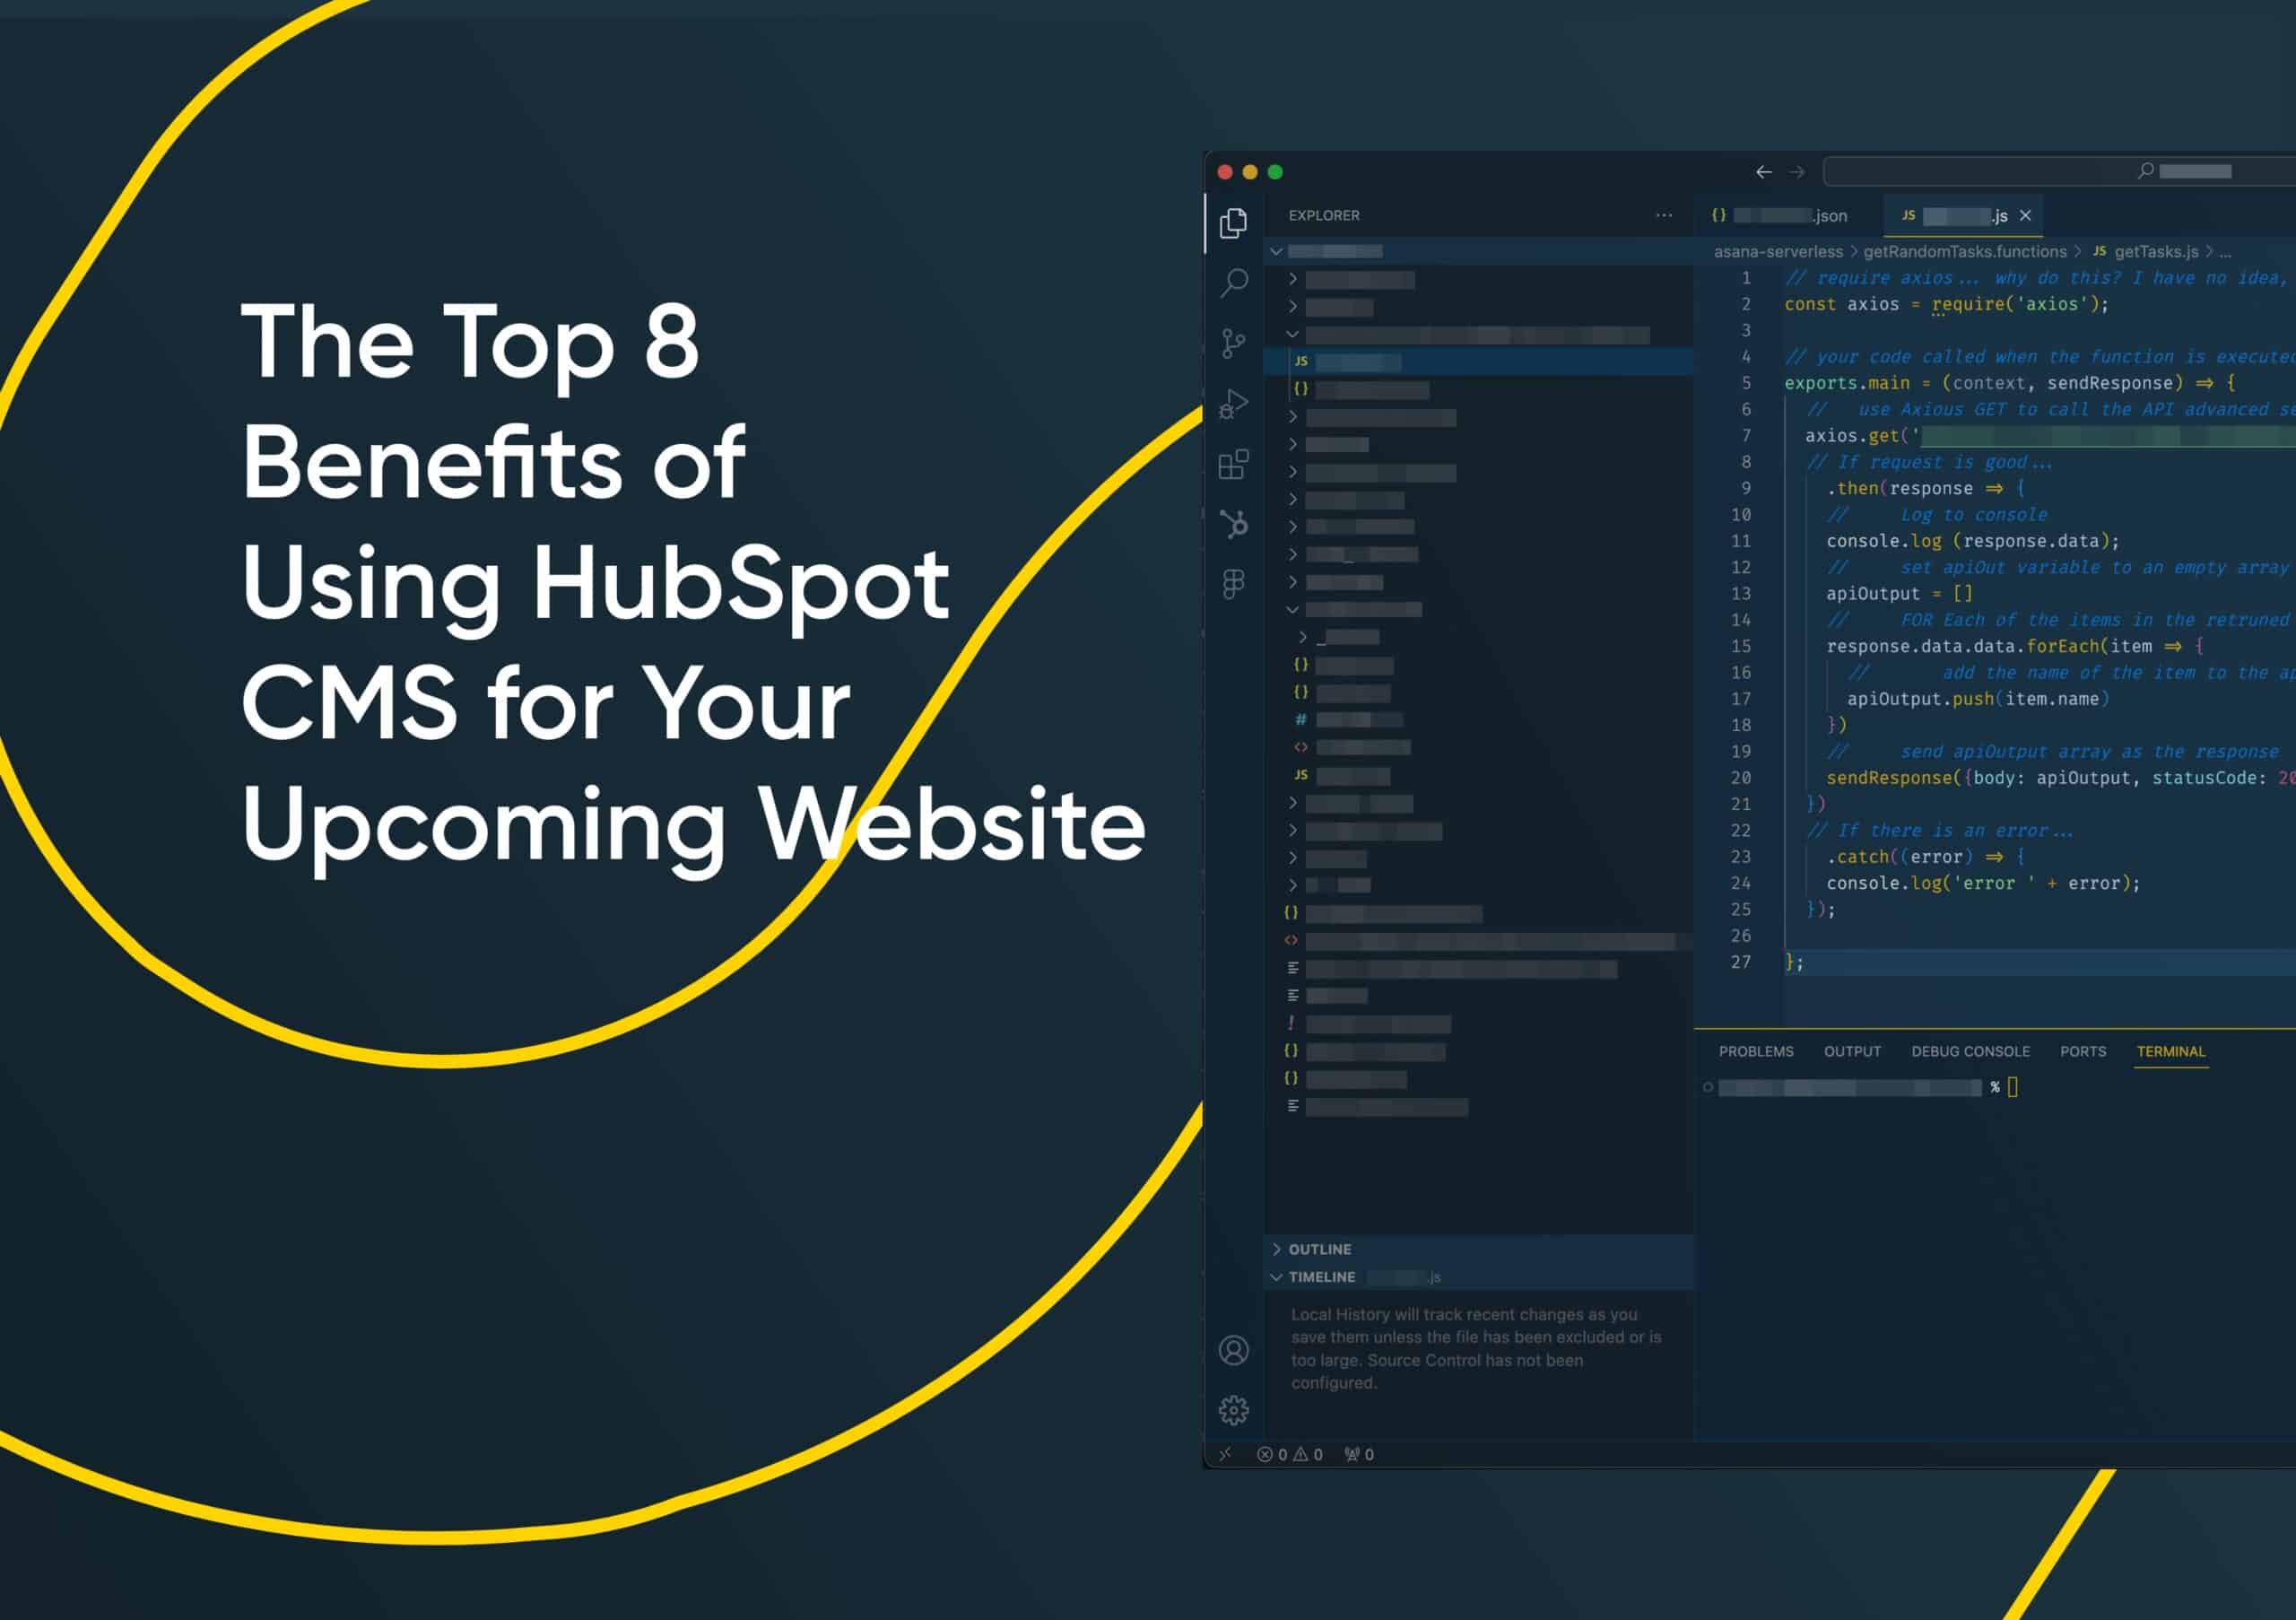 The Top 8 Benefits of Using HubSpot CMS for Your Upcoming Website